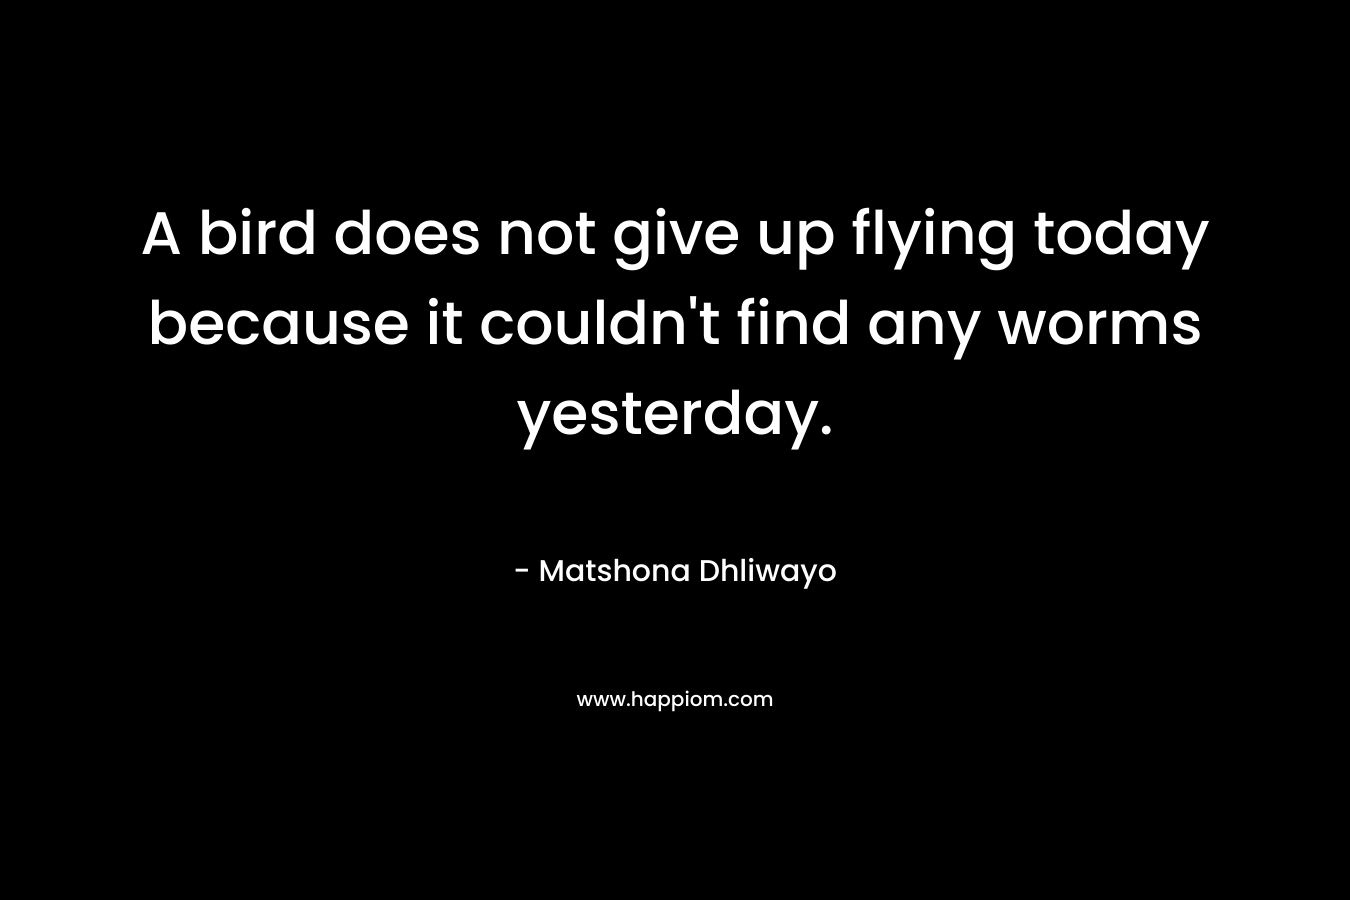 A bird does not give up flying today because it couldn’t find any worms yesterday. – Matshona Dhliwayo